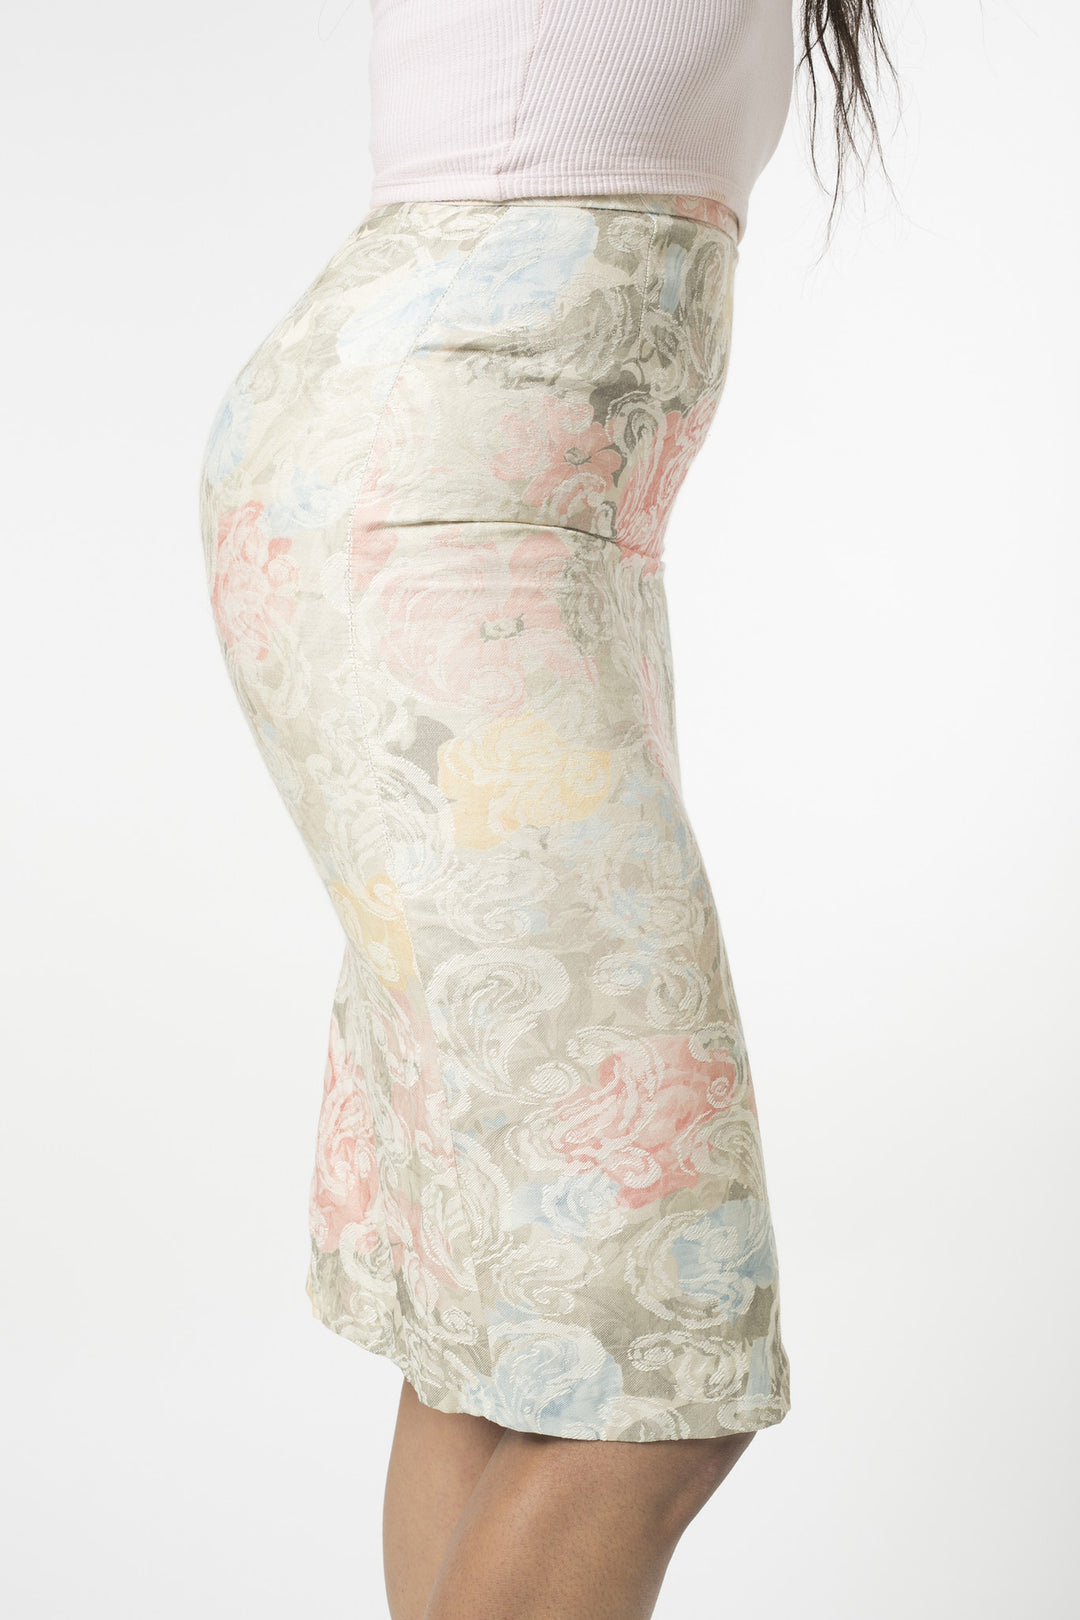 Floral Embrodiered Pastel Pencil Skirt